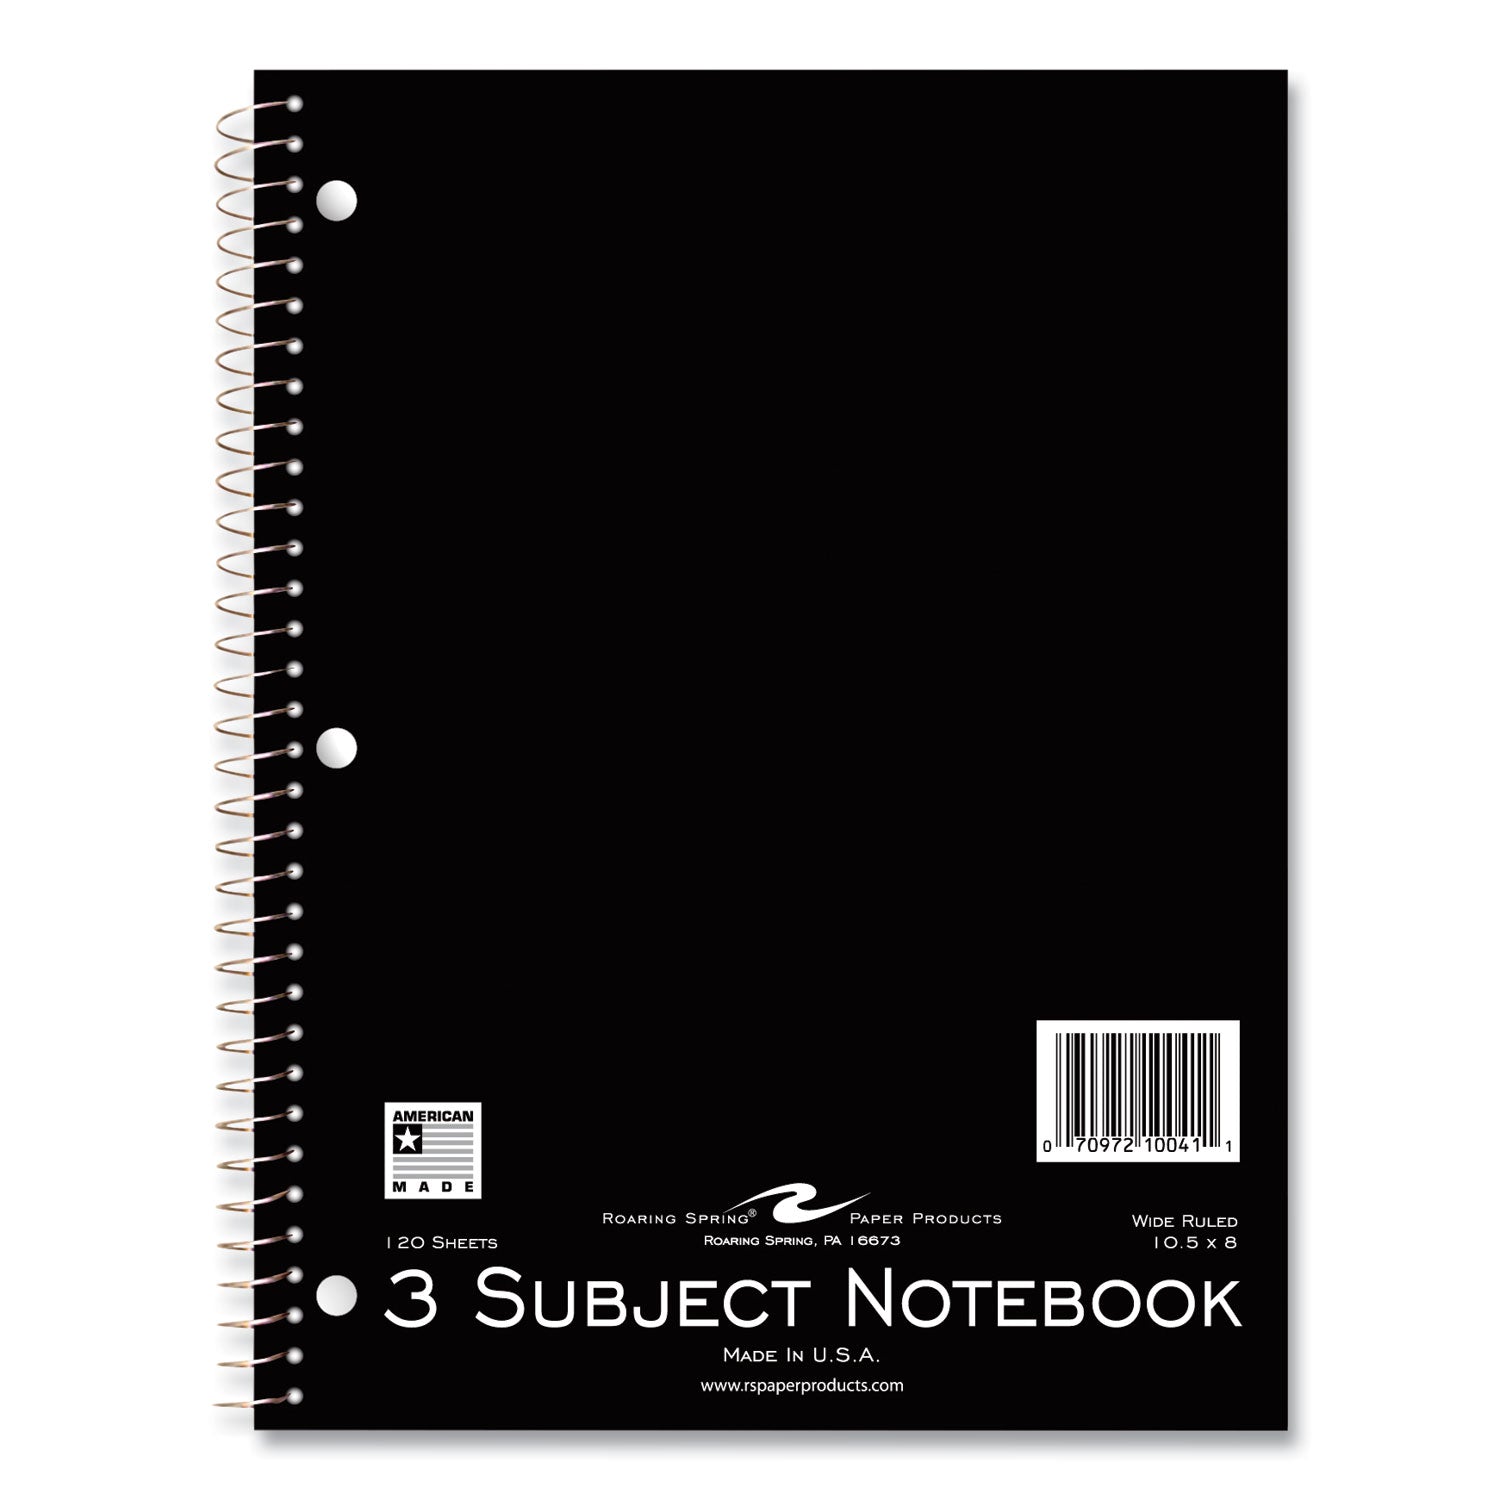 subject-wirebound-promo-notebook-3-subject-wide-legal-rule-asst-cover-120-105x8-sheets-24-ct-ships-in-4-6-bus-days_roa10041cs - 2